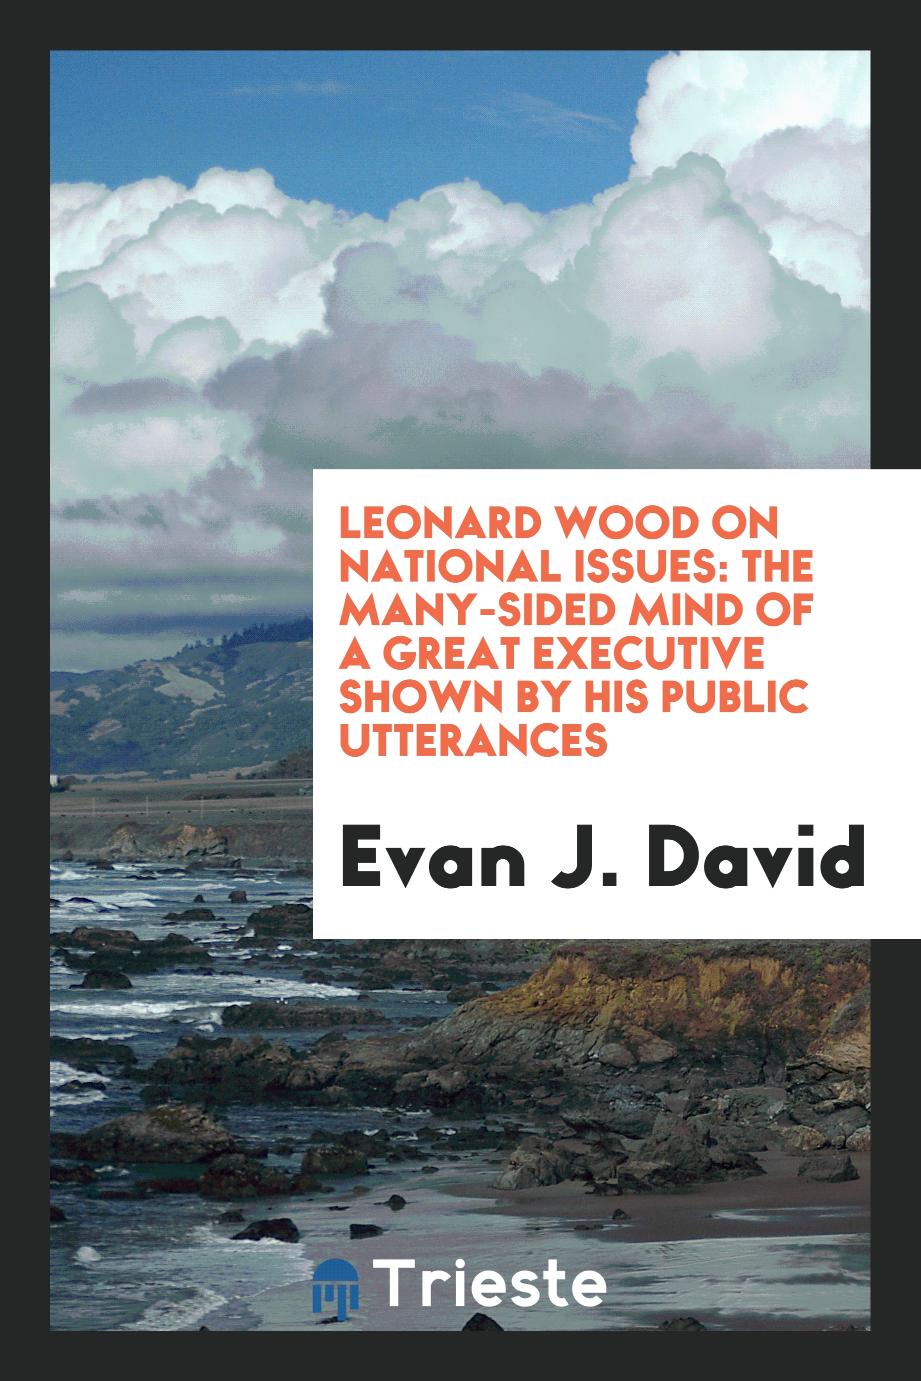 Leonard Wood on National Issues: The Many-sided Mind of a Great Executive Shown by His Public Utterances